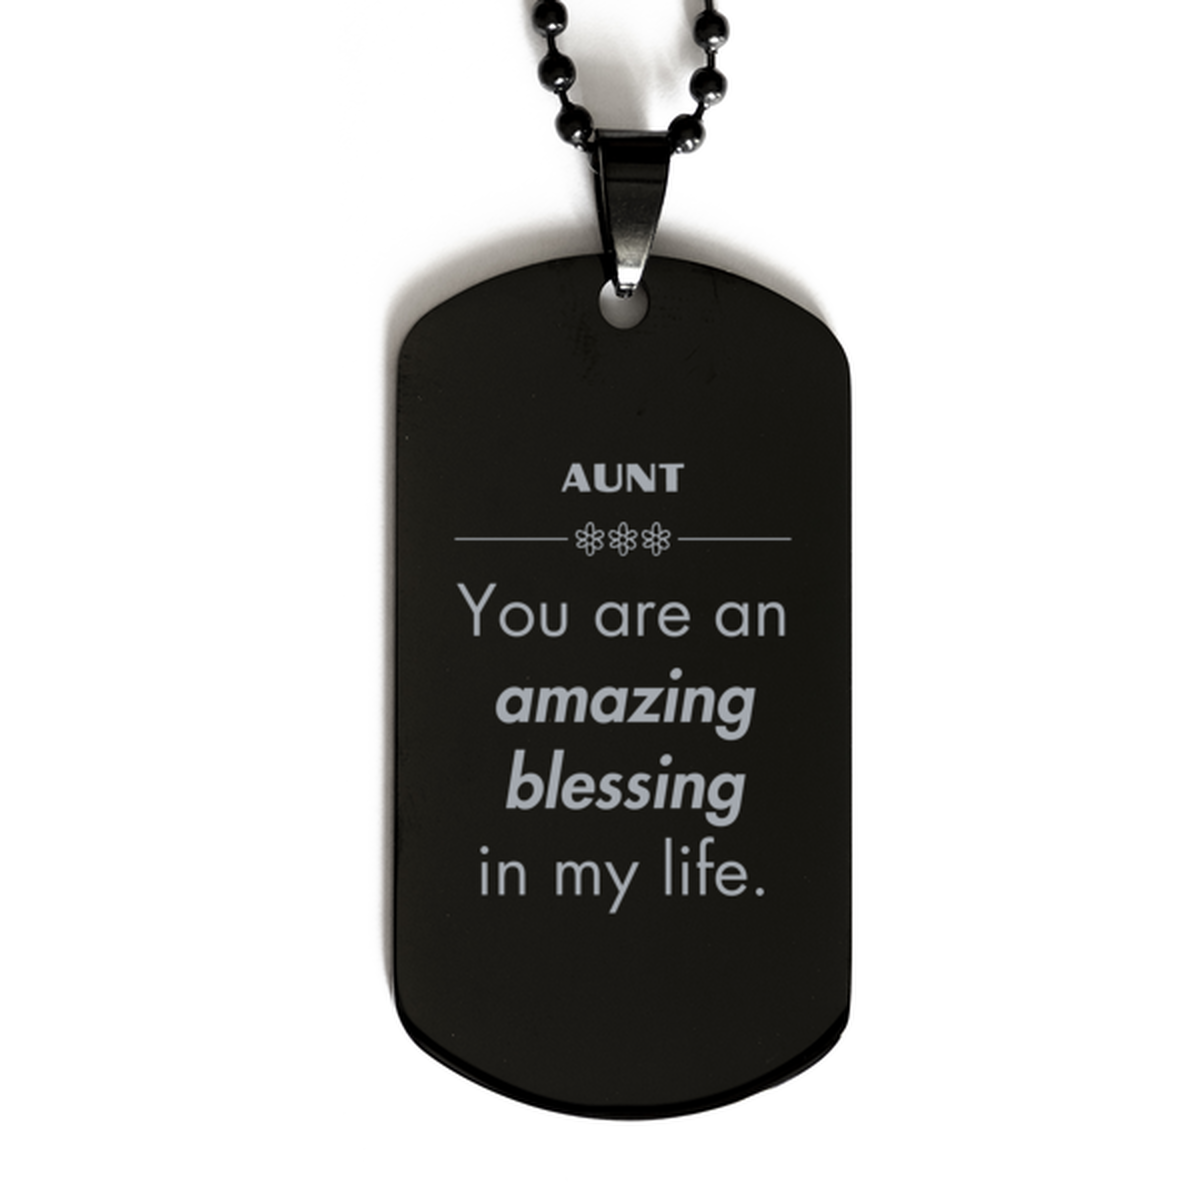 Aunt Black Dog Tag, You are an amazing blessing in my life, Thank You Gifts For Aunt, Inspirational Birthday Christmas Unique Gifts For Aunt